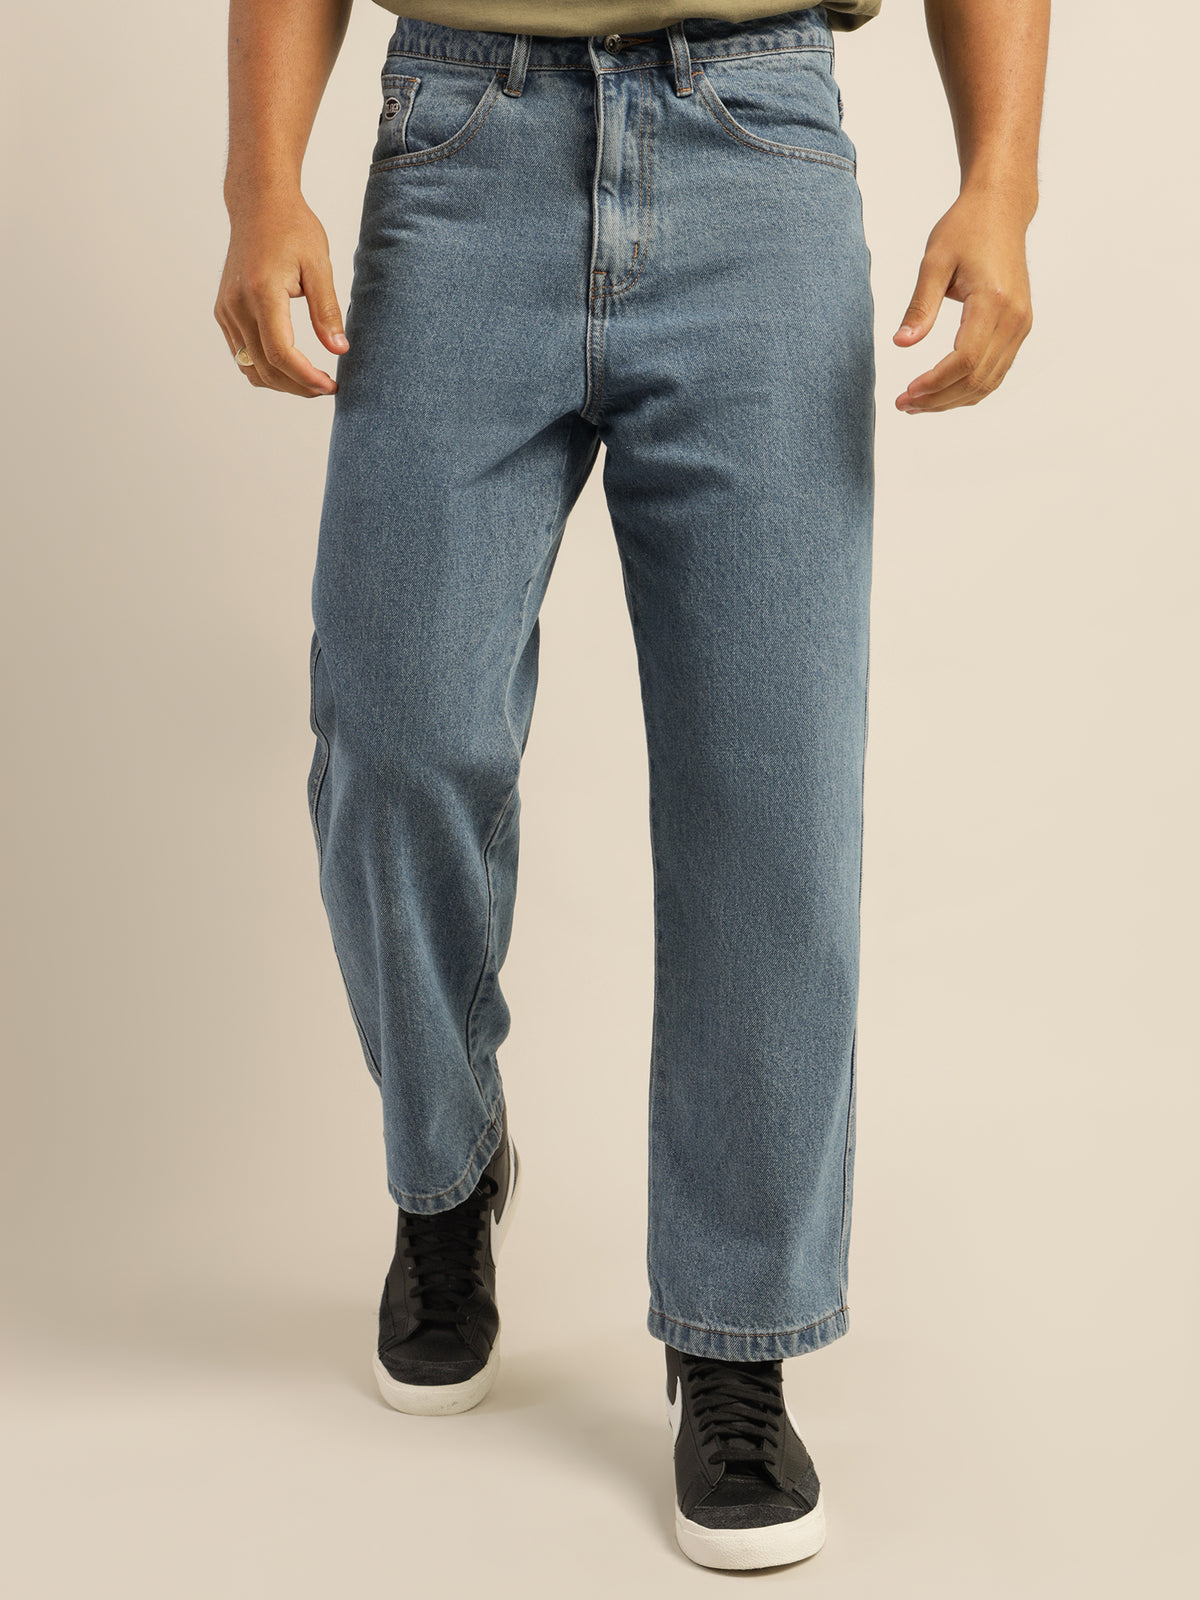 Bull 91 Jeans in Blue Wash